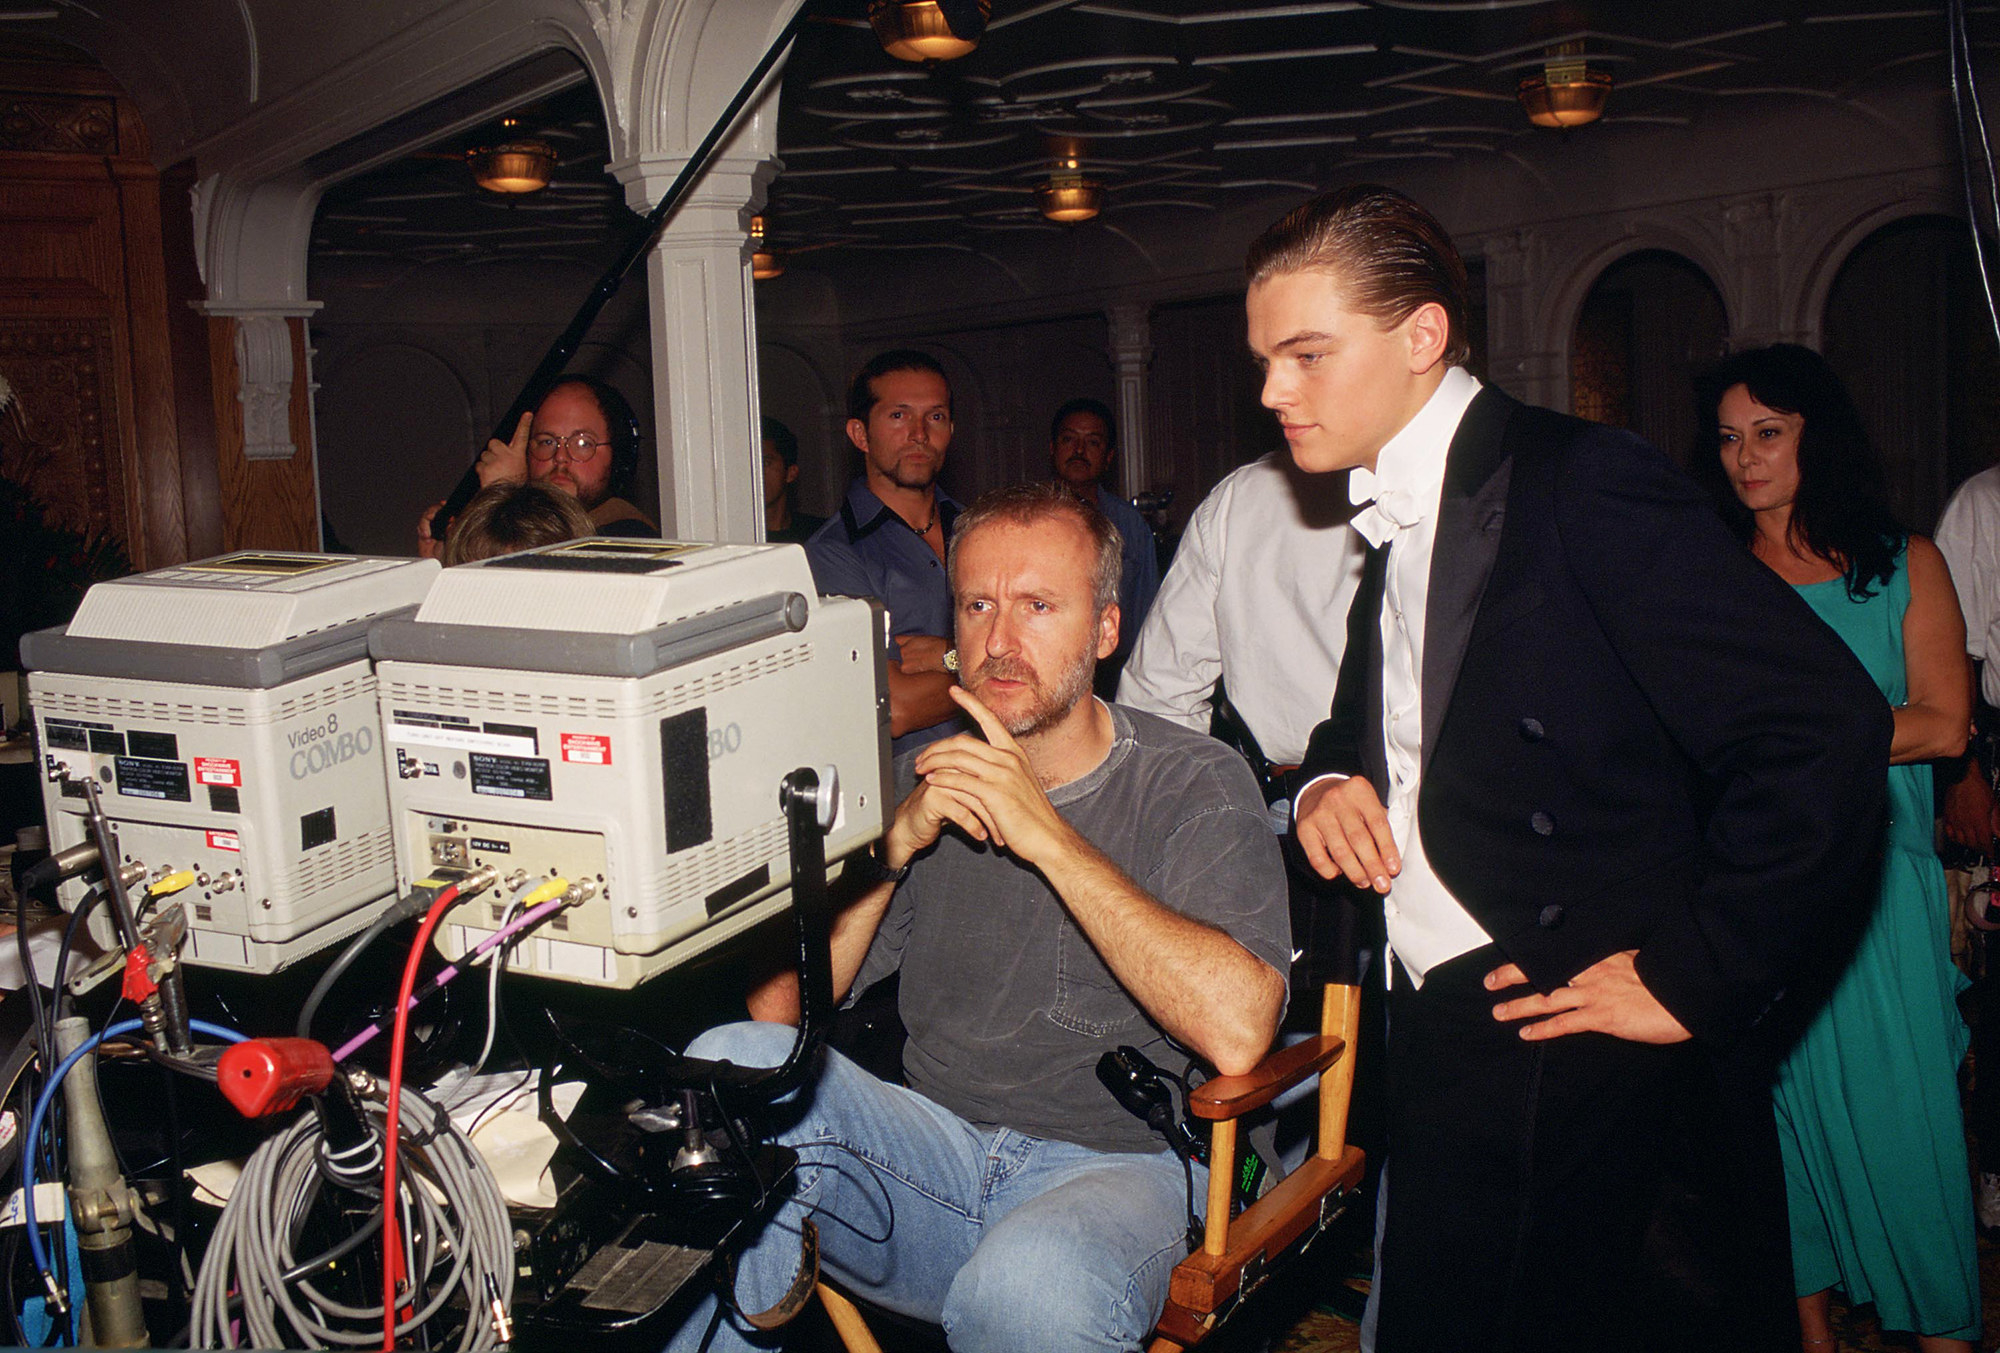 Cameron and DiCaprio reviewing footage, while DiCaprio is in a tux 